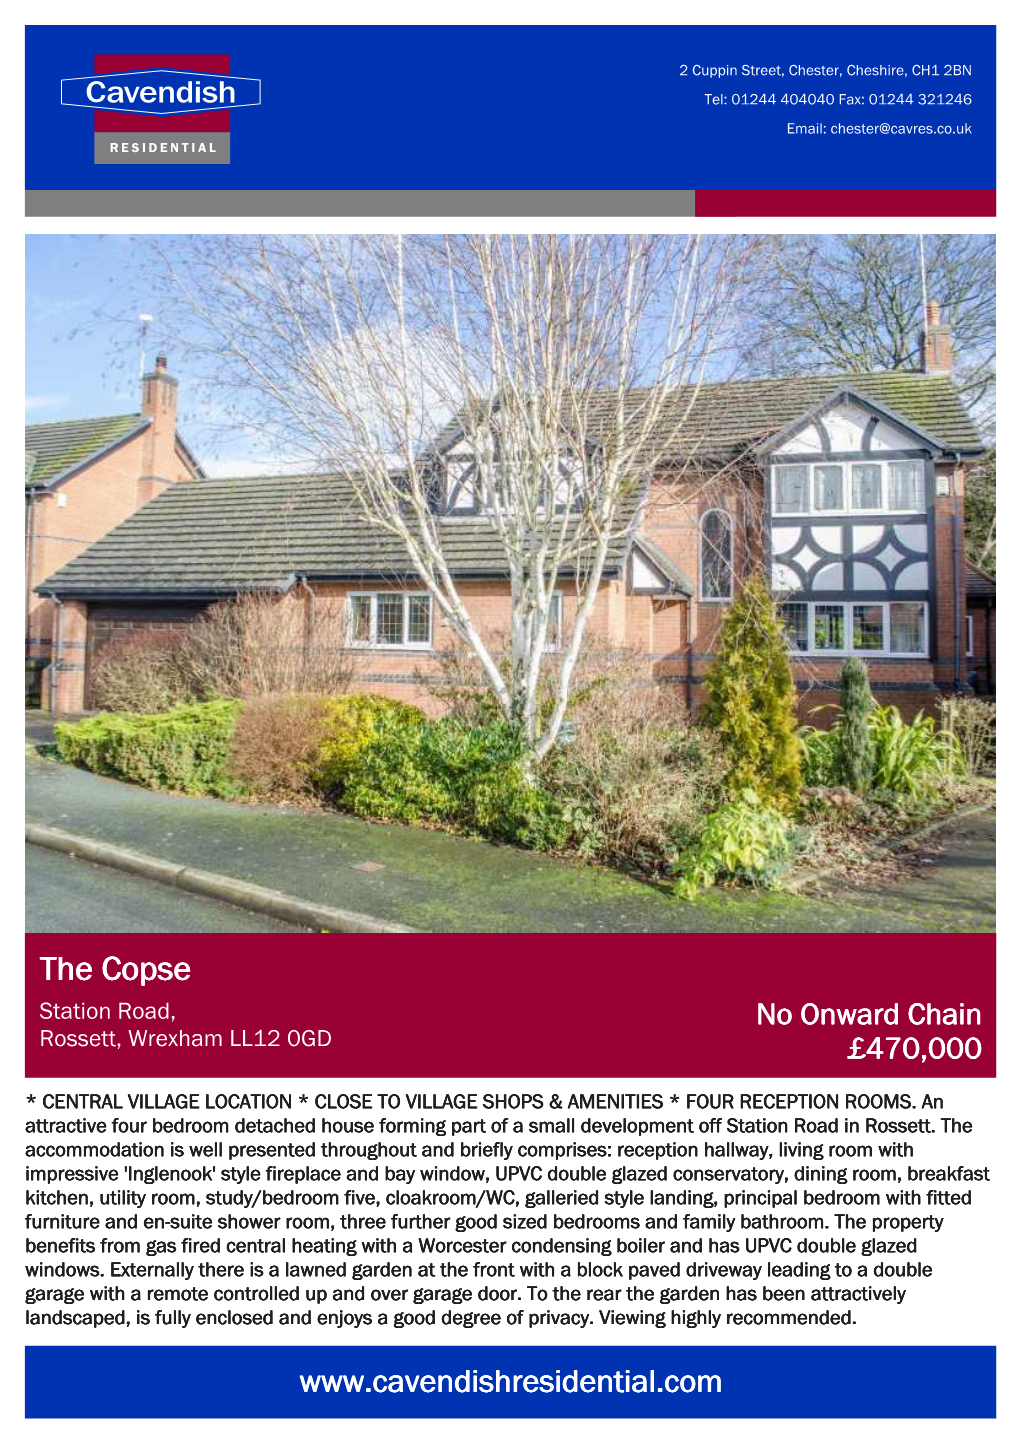 The Copse Station Road, No Onward Chain Rossett, Wrexham LL12 0GD £470,000